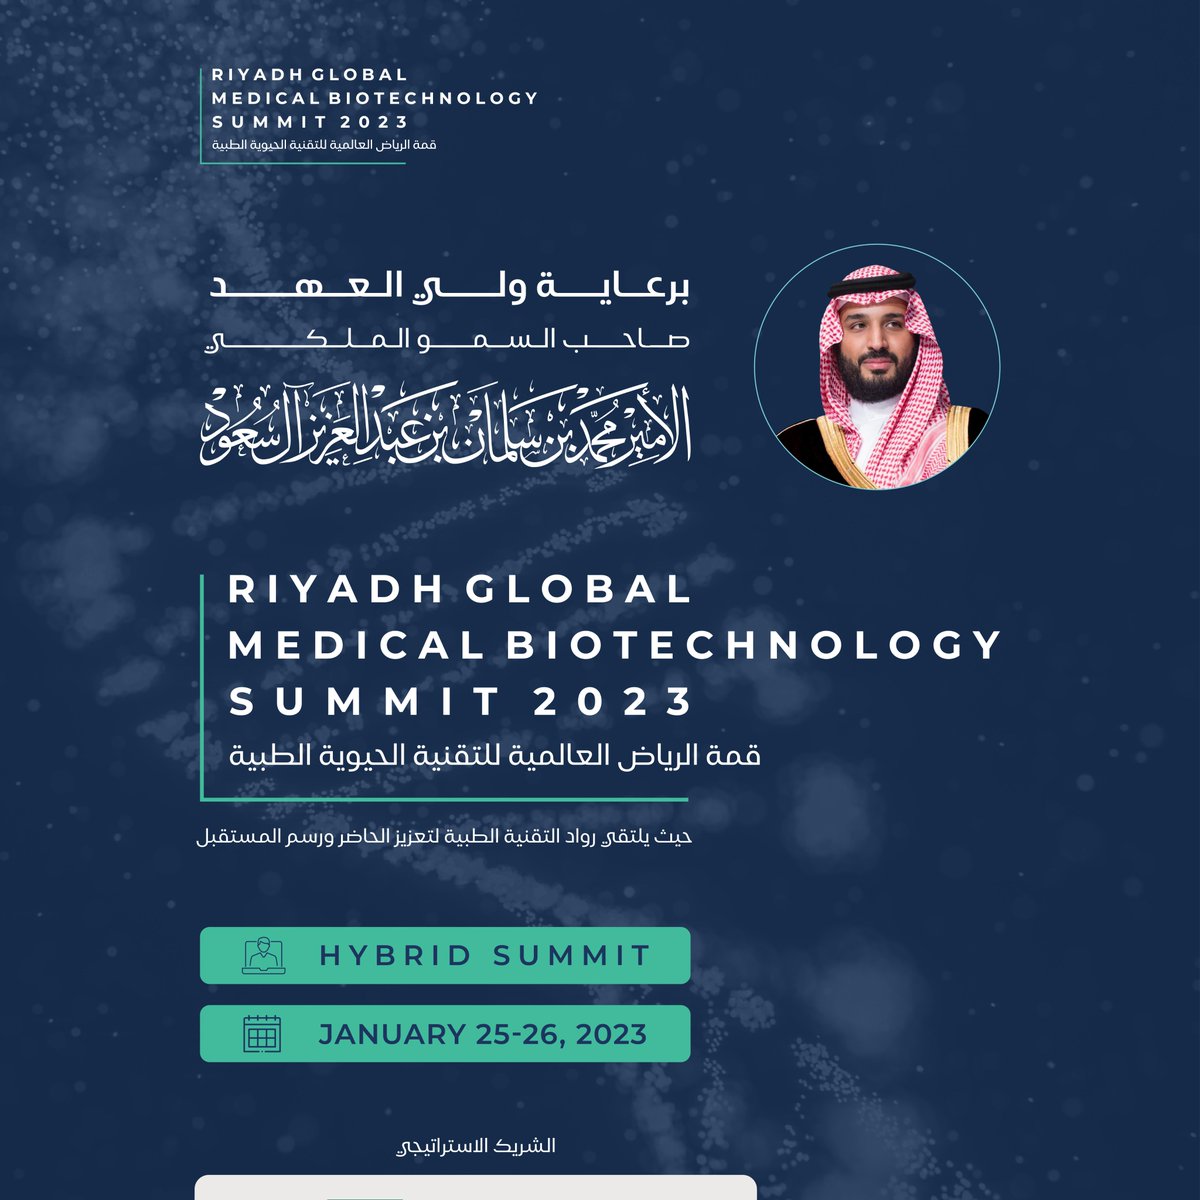 A new era of health in #SaudiArabia and the world 🙏🏻

This summit will be beneficial for the future of all people, it's not just for #Saudi Arabia.

I think this’s the most beneficial summit in the last 10 years👌🏻 
#RGMBS2023 #القمة_العالمية_للتقنية_الحيوية 